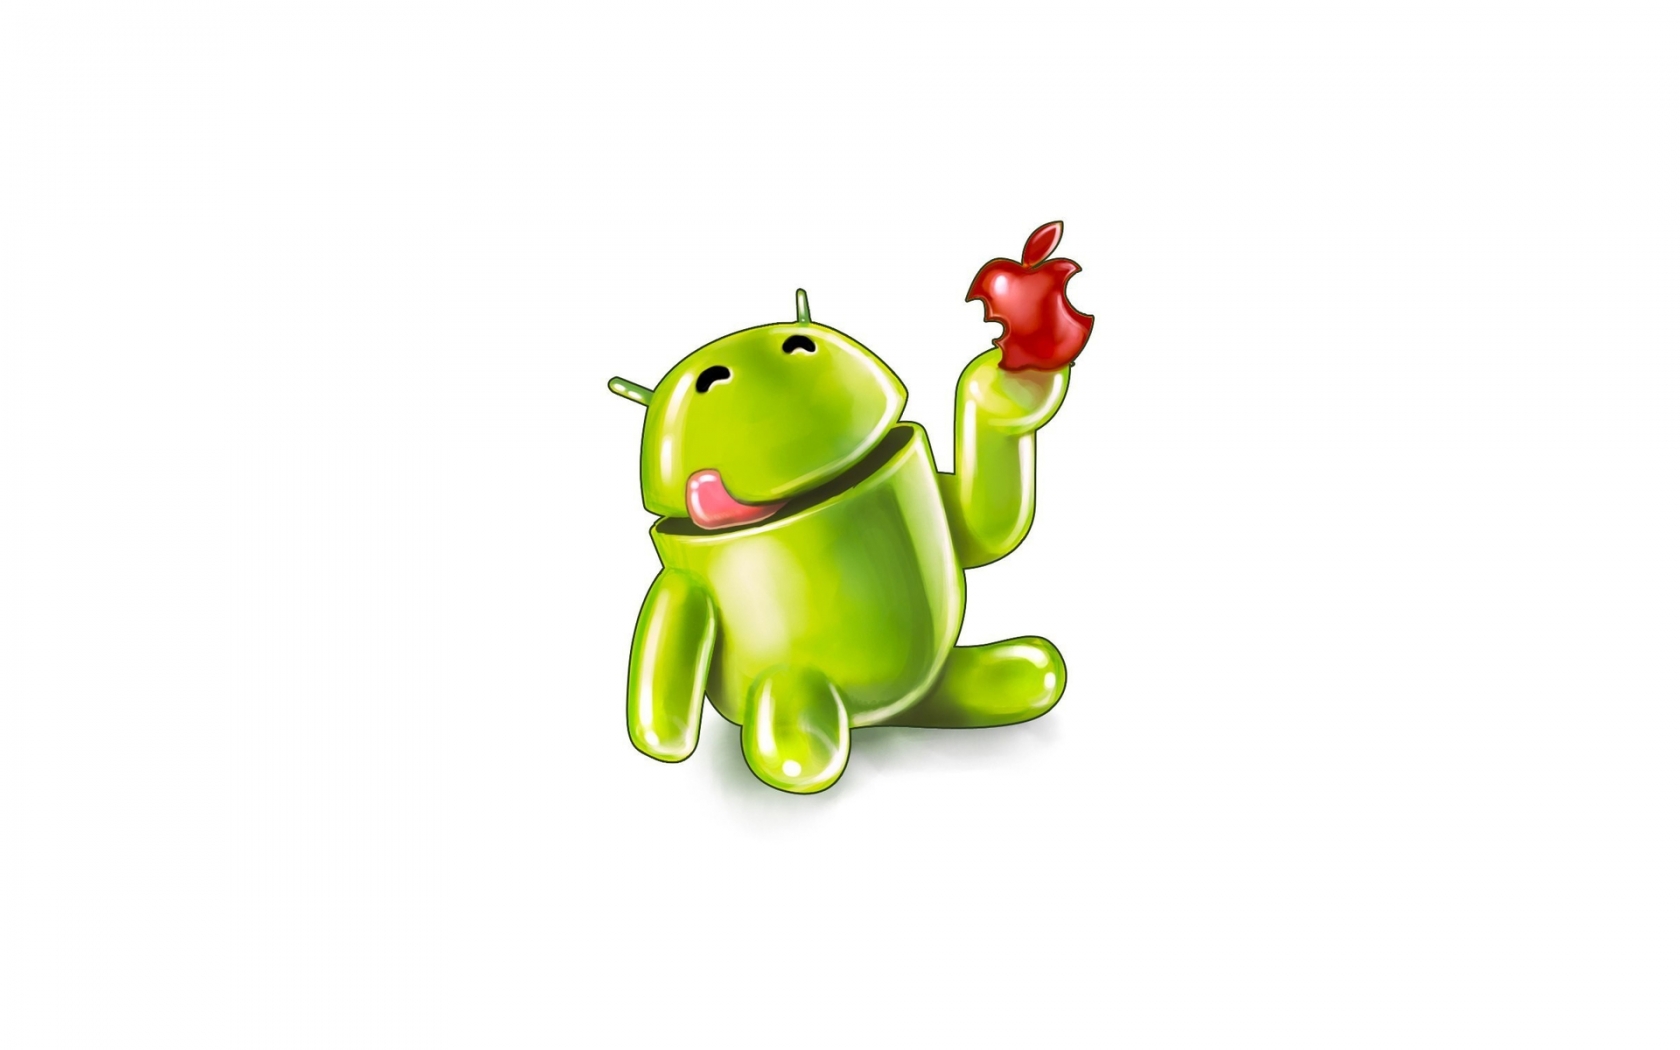 Android Eating Apple for 1680 x 1050 widescreen resolution